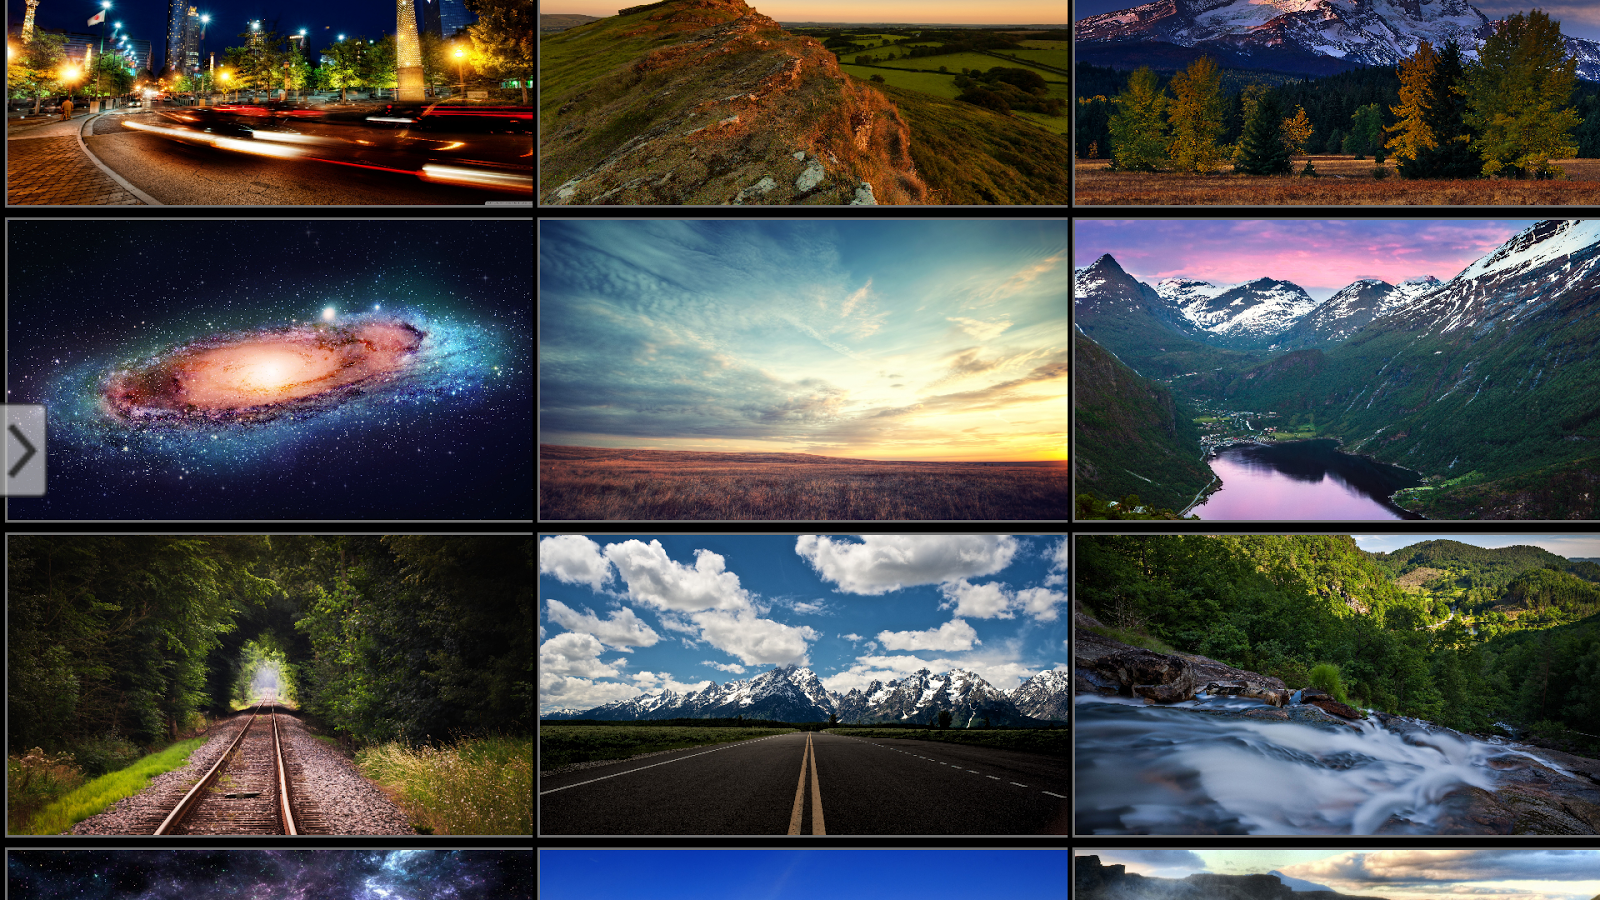 4k Ultra HD Wallpaper Lite Android Apps On Google Play